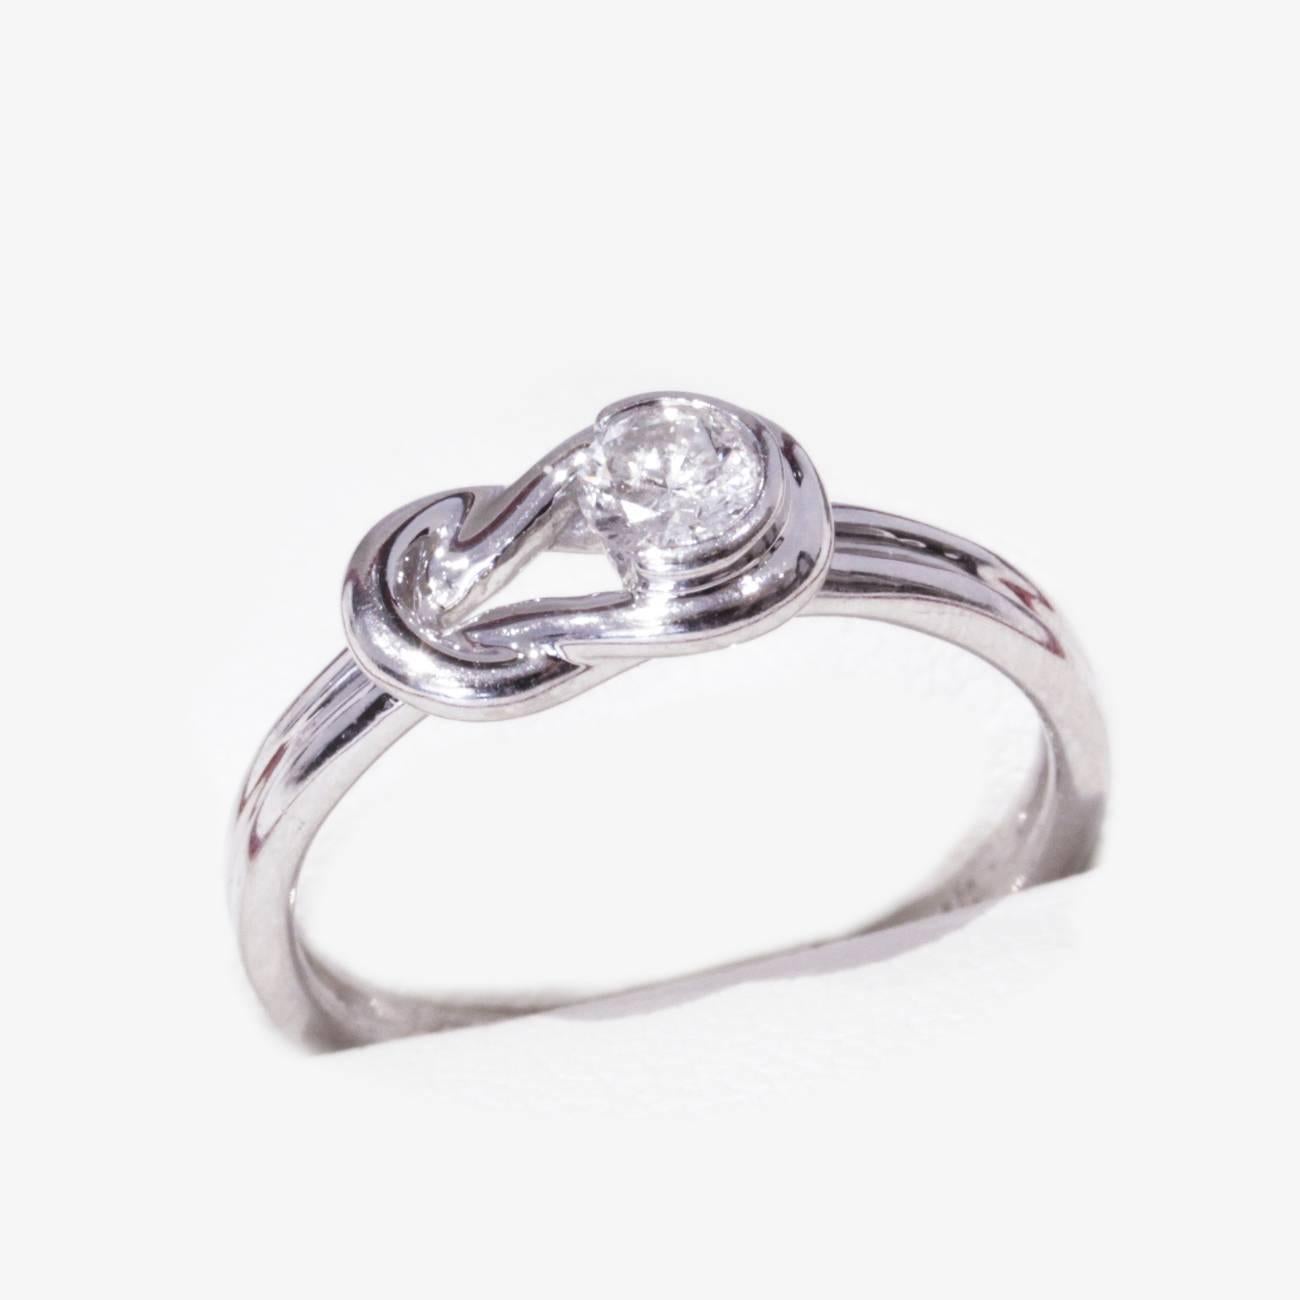 Very Lovely Knot style, vintage white gold Engagement ring, featuring a brilliant cut Diamond
-
14ct White gold single stone Diamond Engagement ring. Round brilliant cut Diamond part rub over set in a love knot surround in a grooved 2.4mm